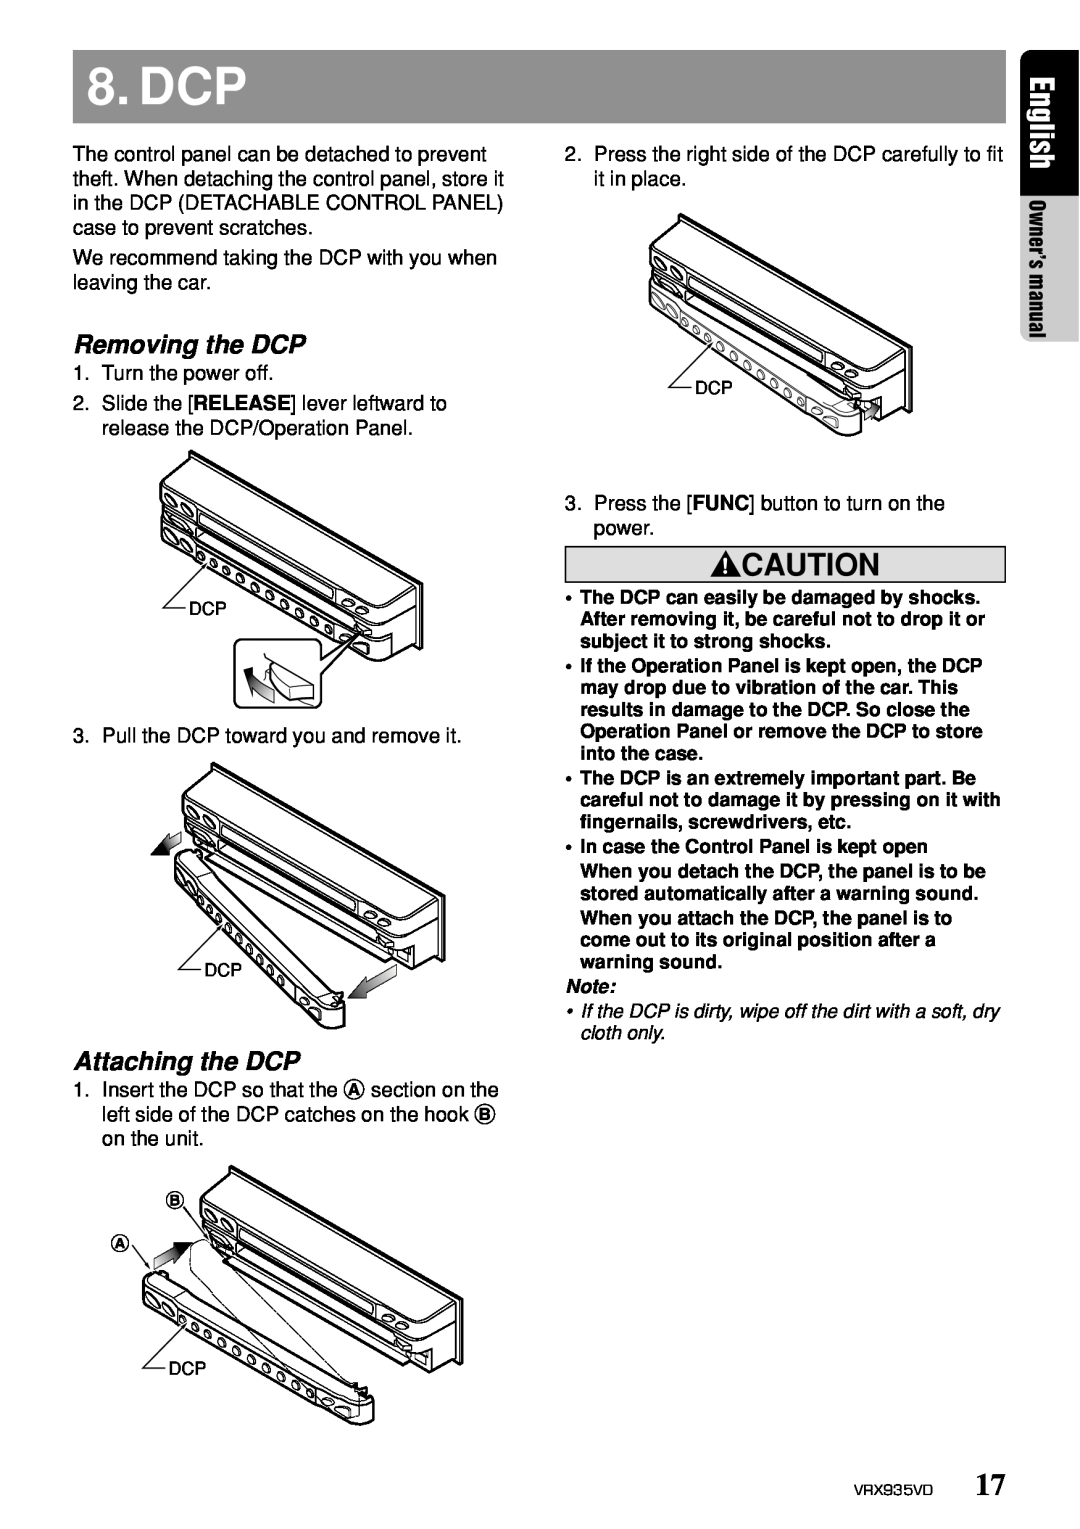 Clarion VRX935VD owner manual Dcp, Removing the DCP, Attaching the DCP, English, Owner’smanual 